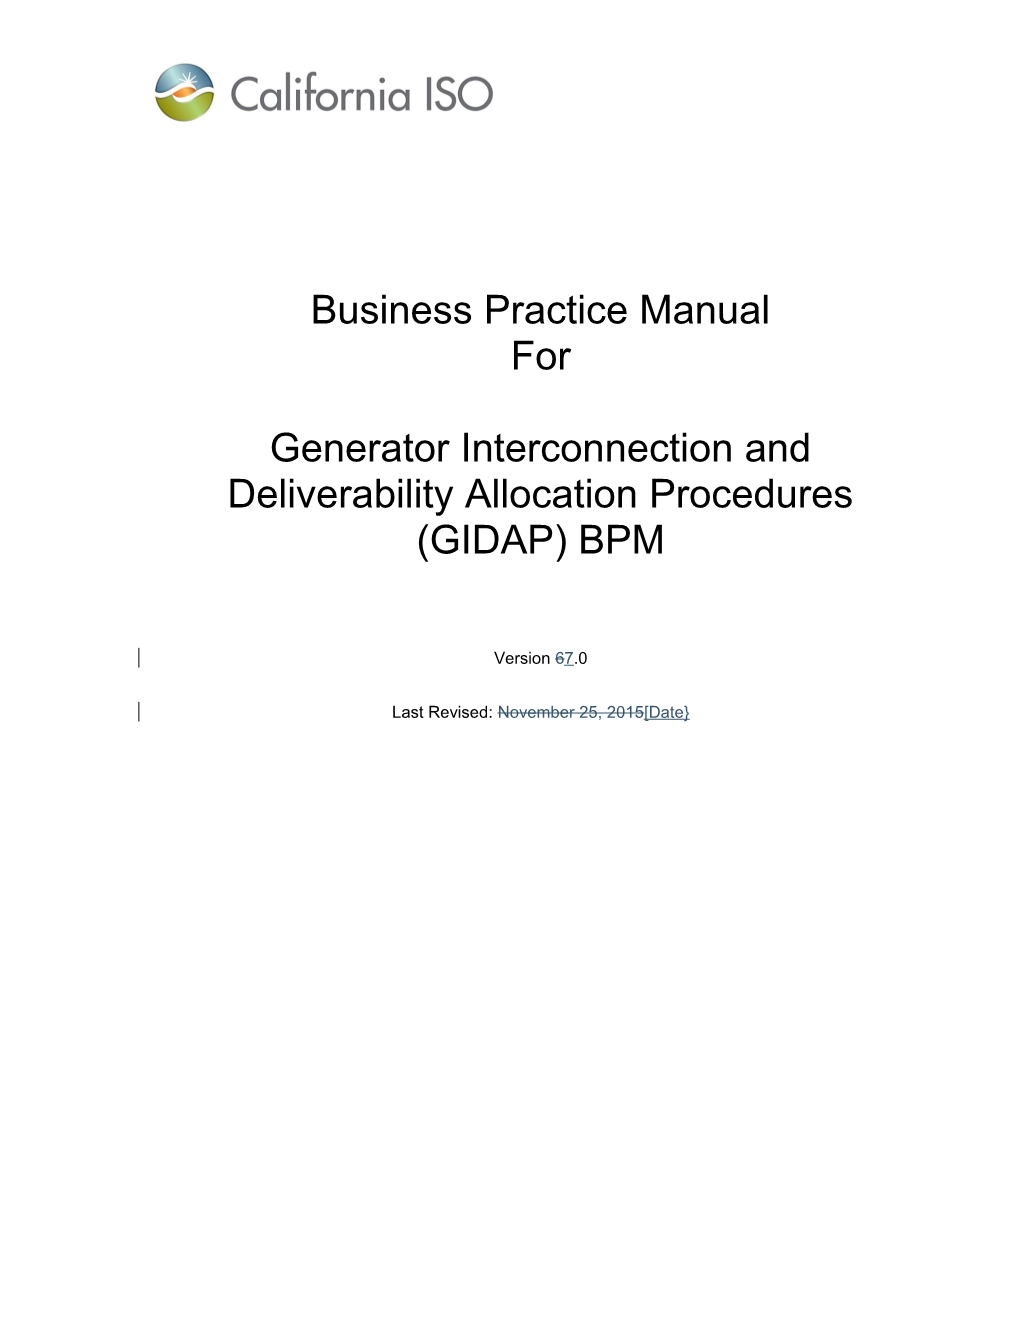 CAISO Business Practice Manual BPM for the Generator Interconnection and Deliverability s1